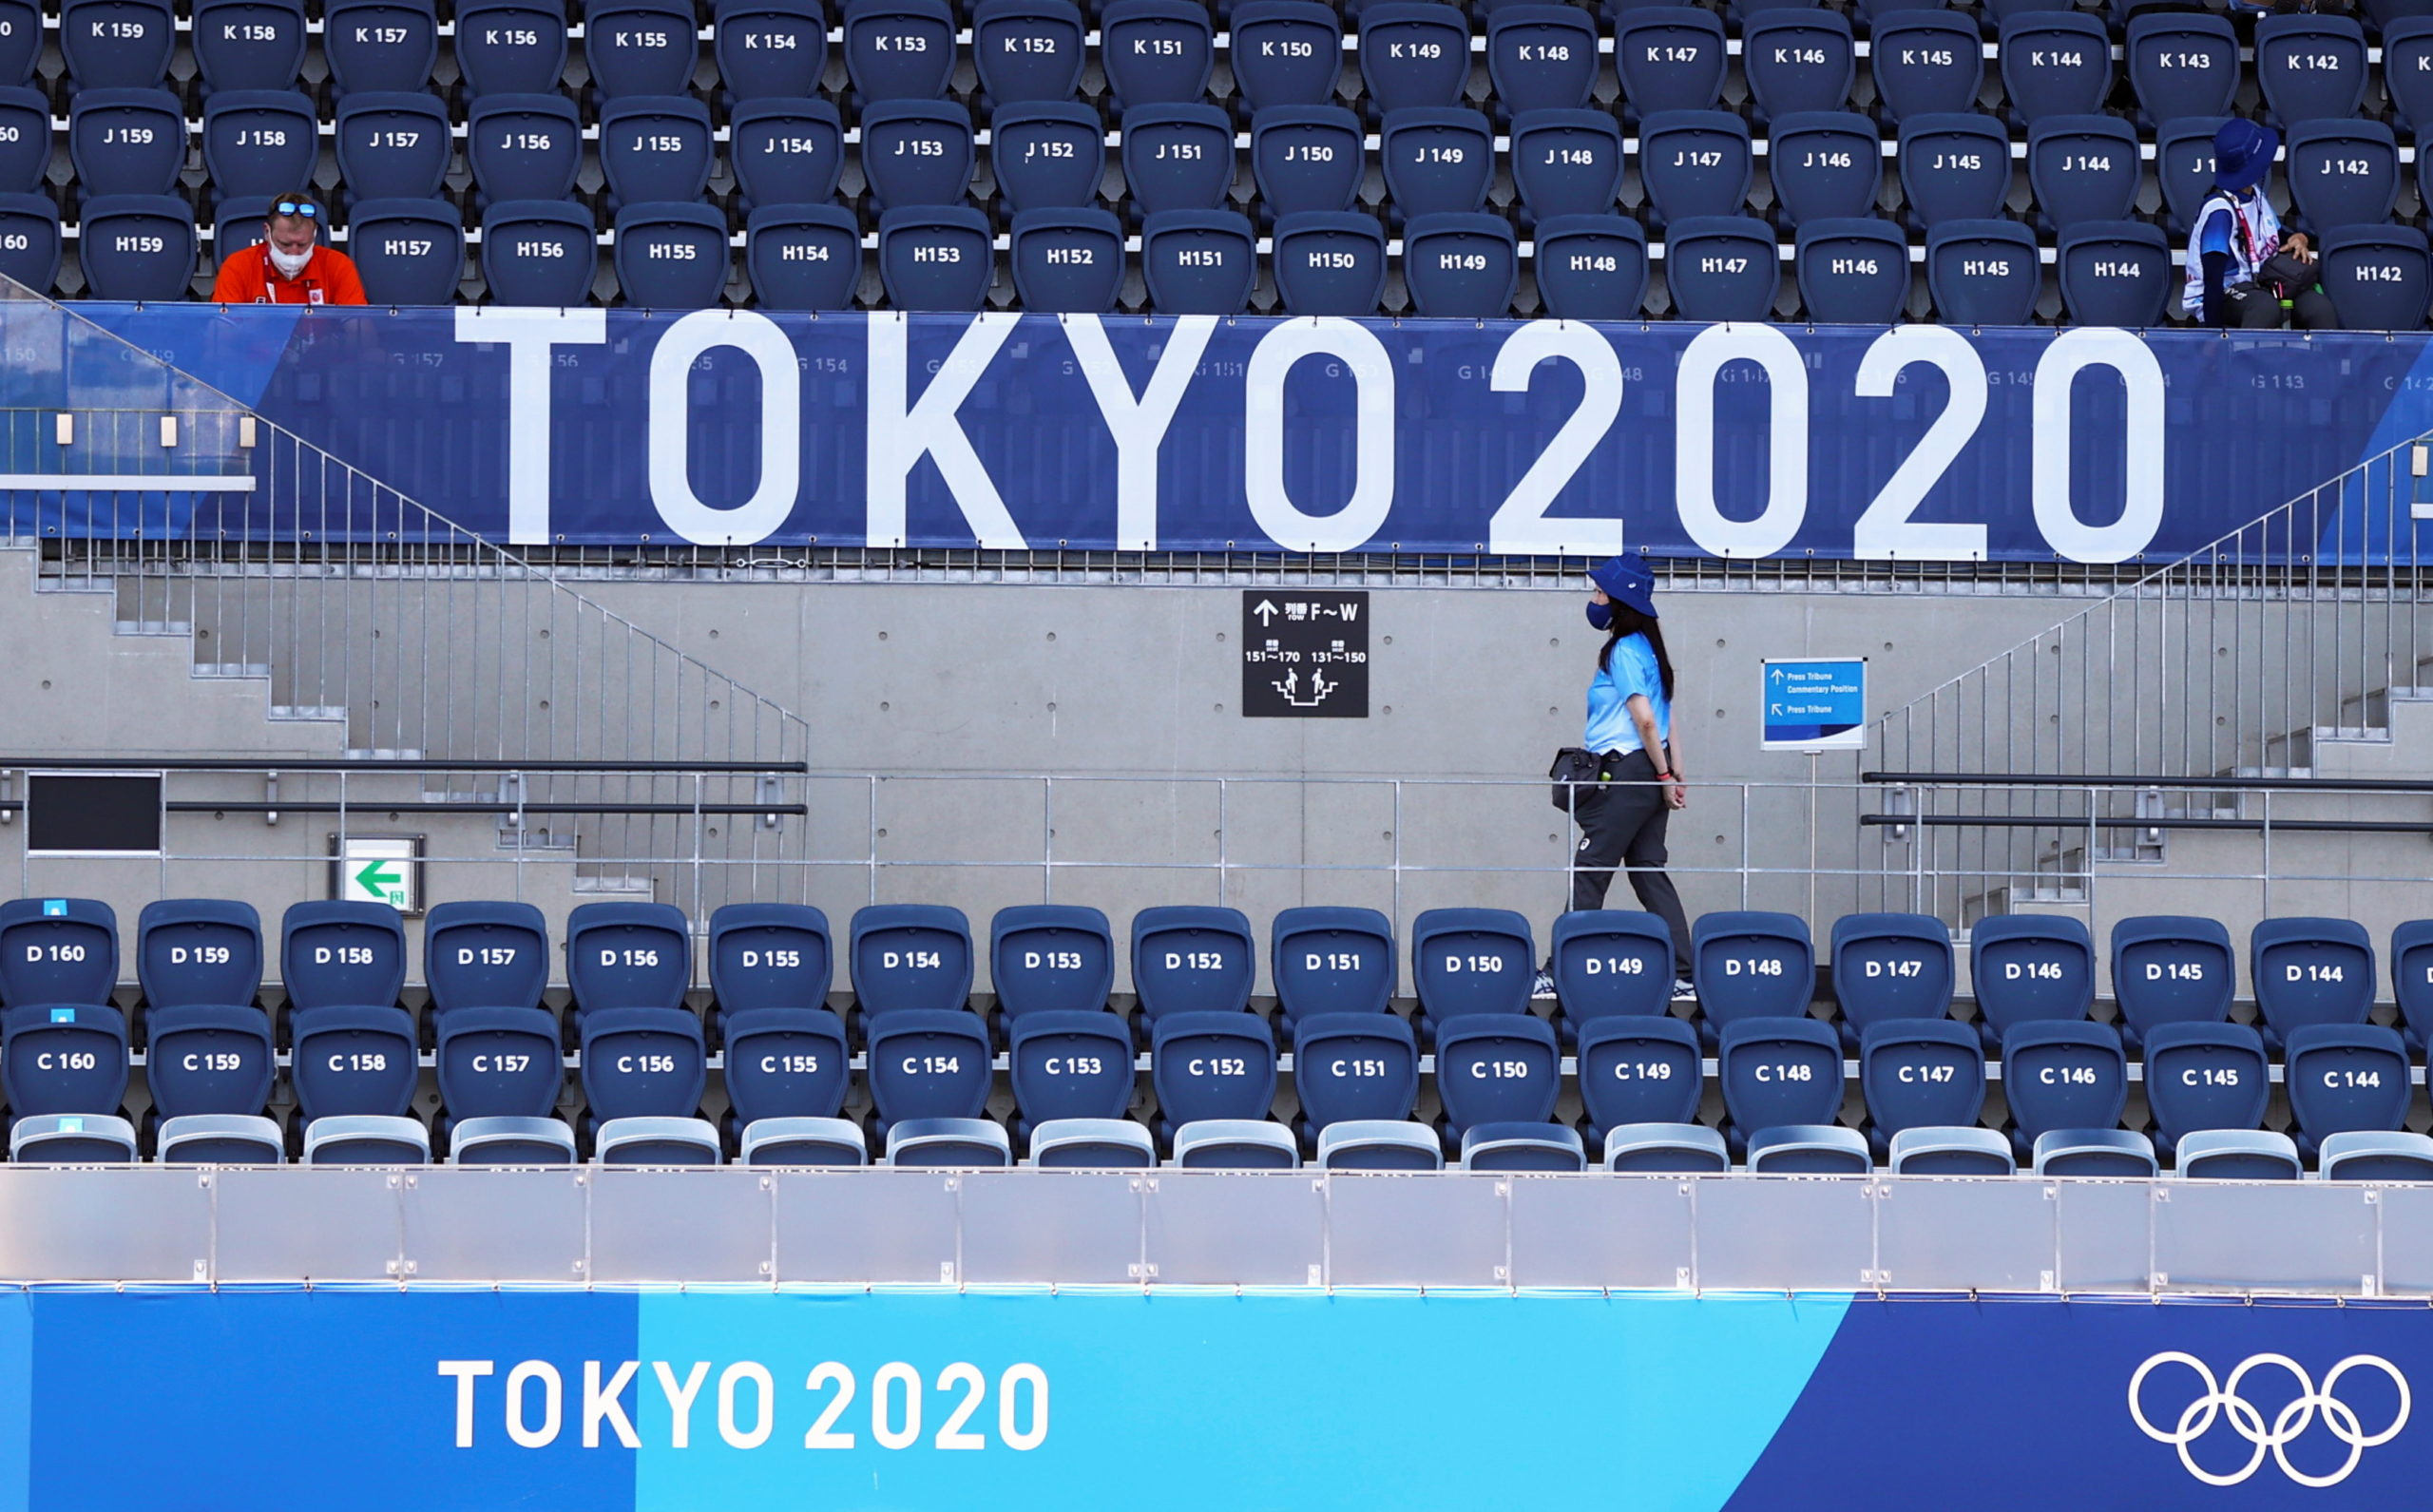 FILE PHOTO: A spectator sits as a volunteer walks beaneath a logo during the Tokyo 2020 Olympic Games in at the Oi Hockey Stadium in Tokyo, Japan, July 24, 2021.